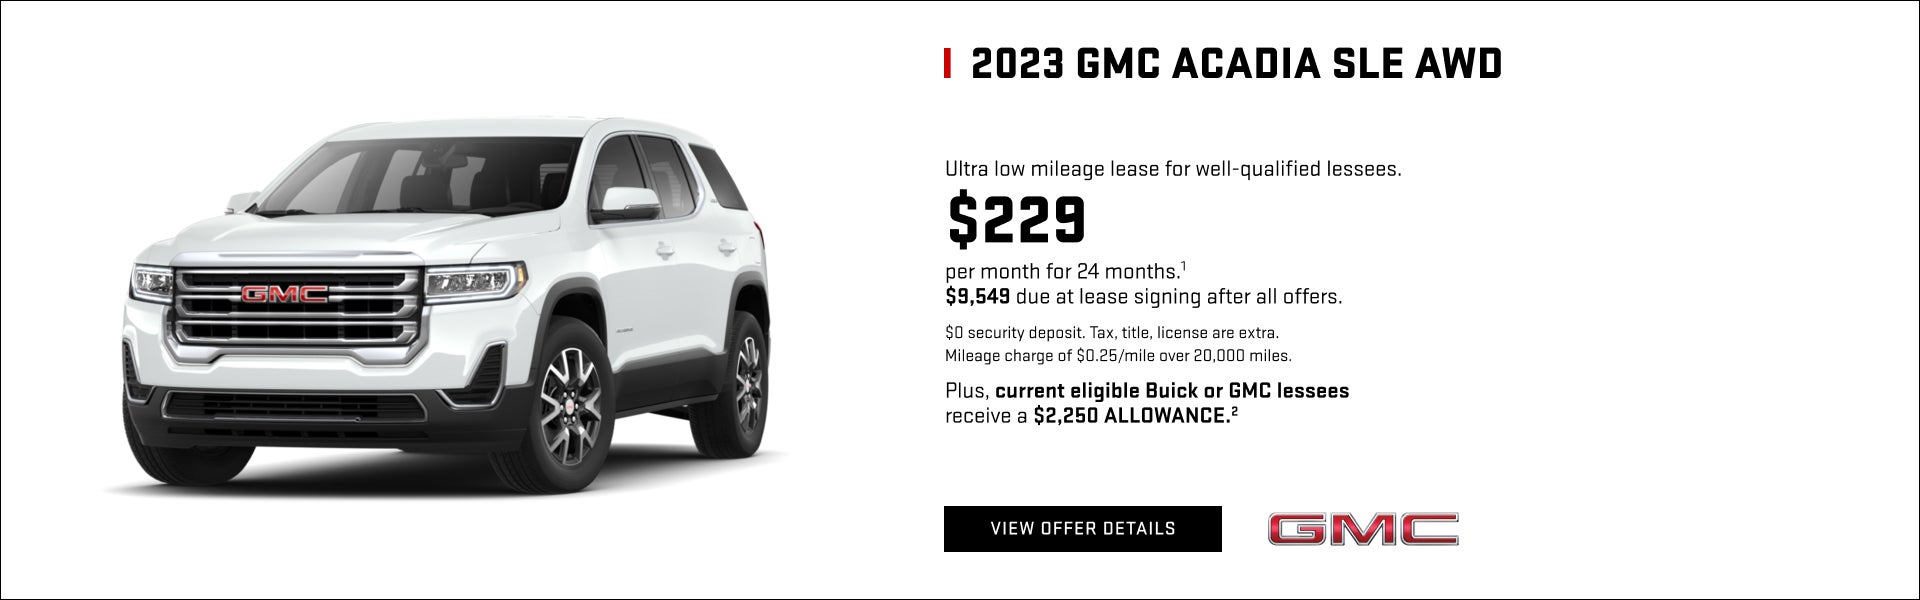 Ultra low mileage lease for well-qualified lessees.

$229 per month for 24 months.1 

$9,549 due ...